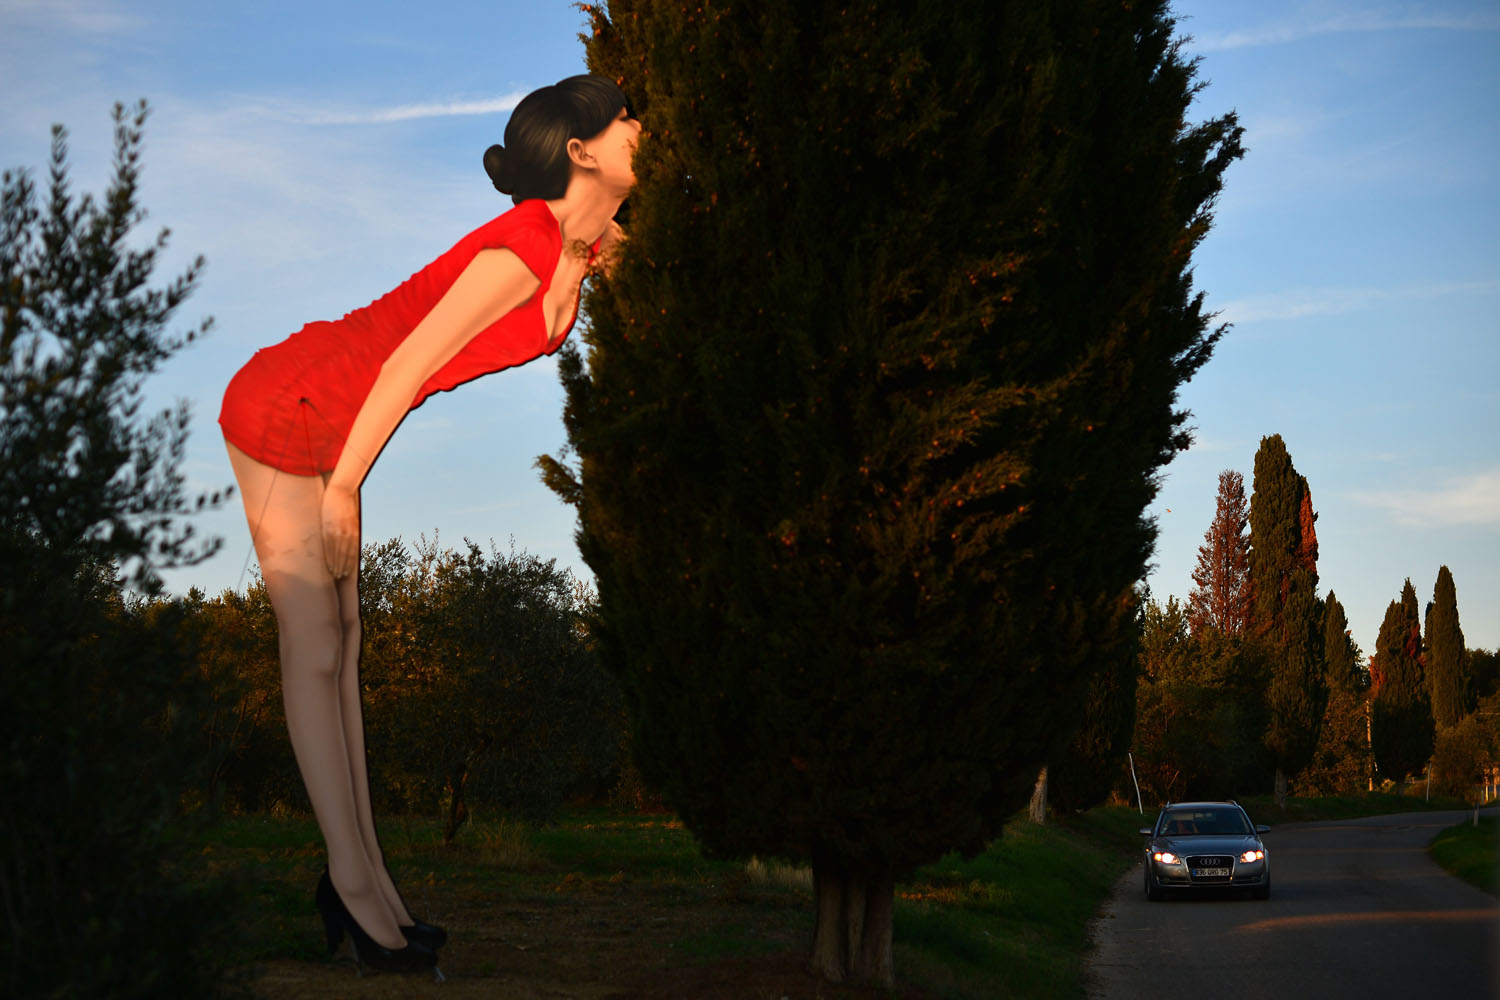 Oct. 5, 2012. A giant placard of a woman giving a kiss is set up by  a road near Gaiole in Chianti, Italy.